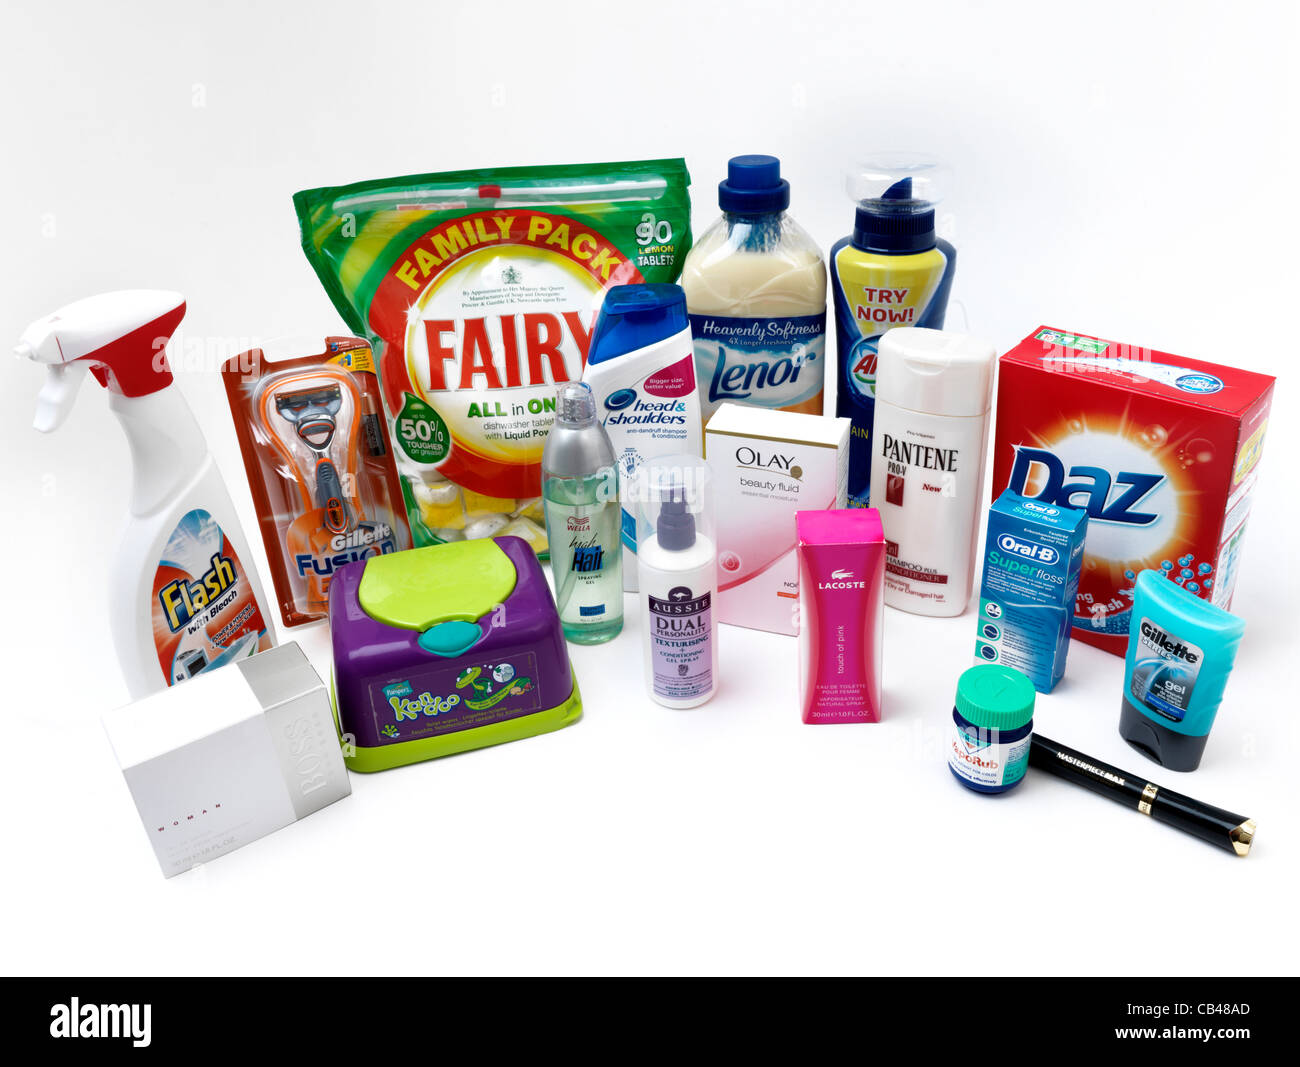 A Collection Of Procter And Gamble Products Stock Photo